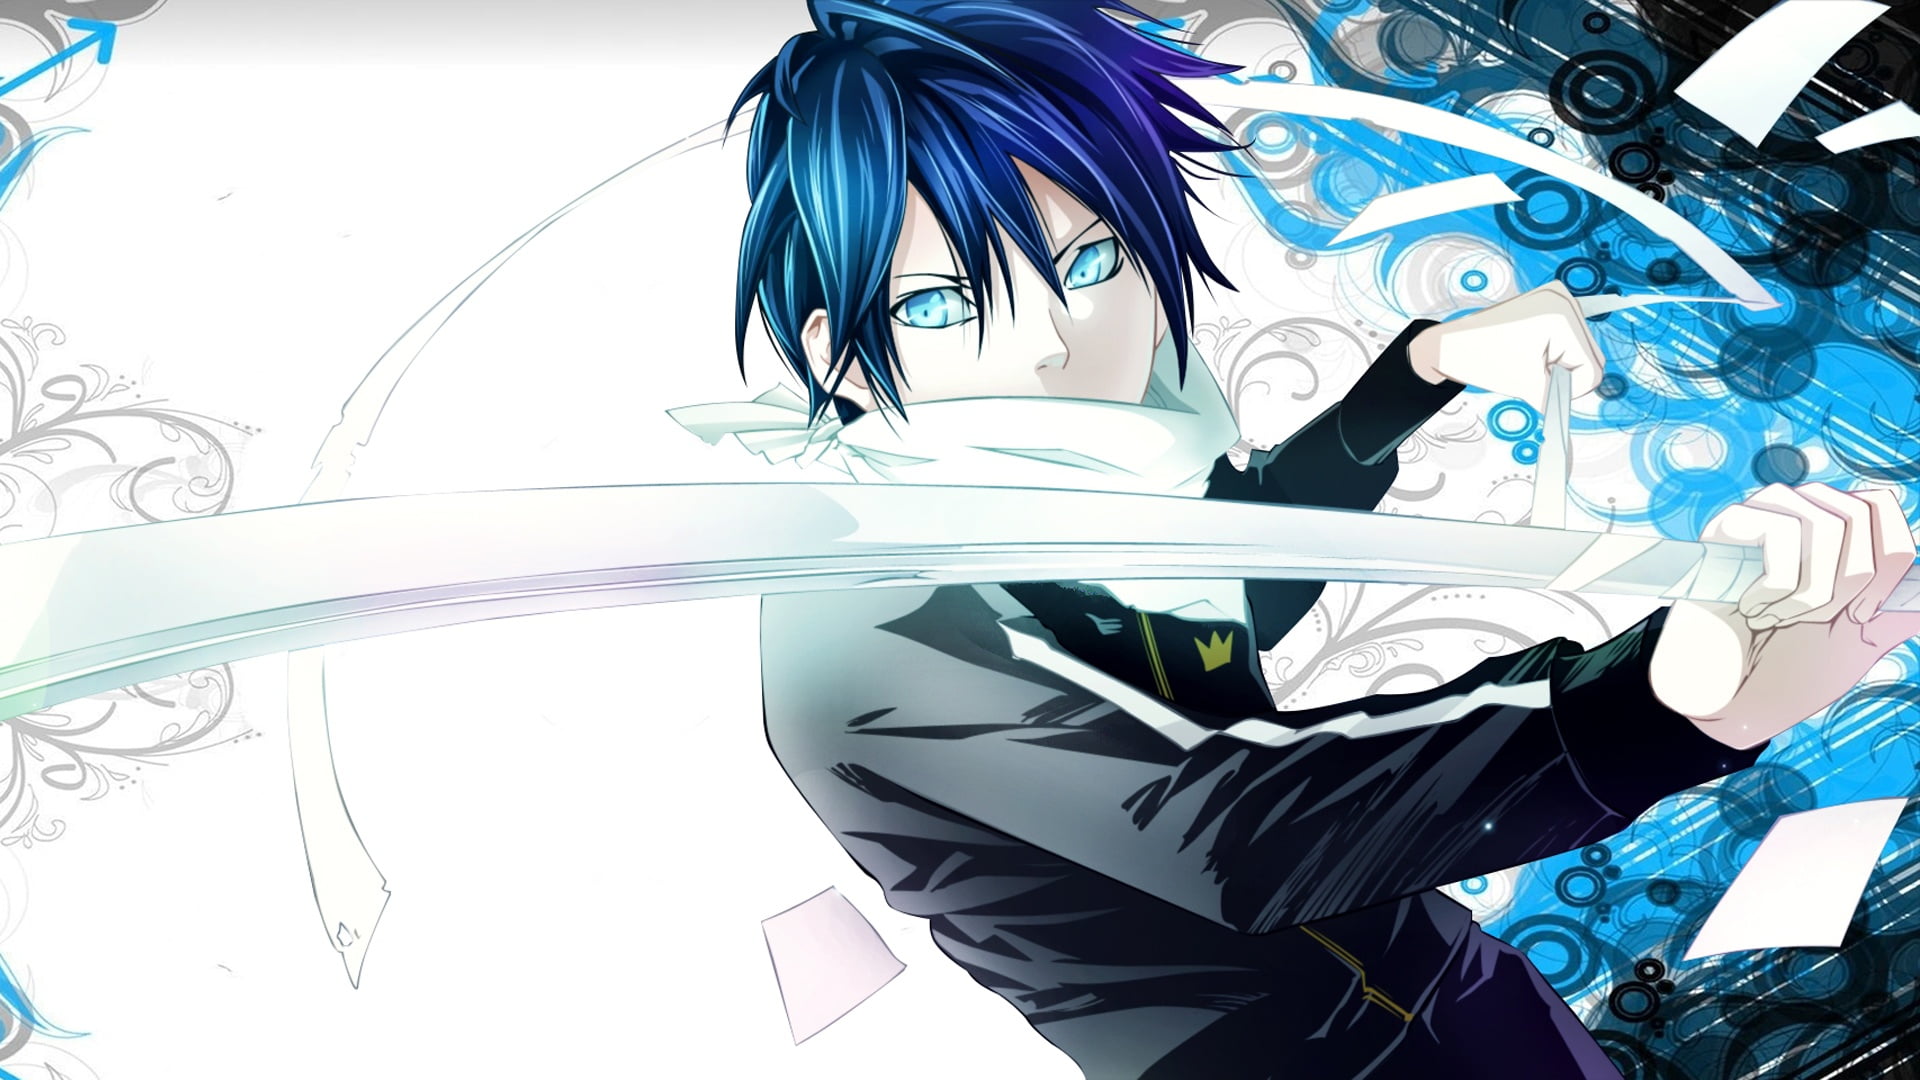 2. "Yato" from Noragami - wide 8